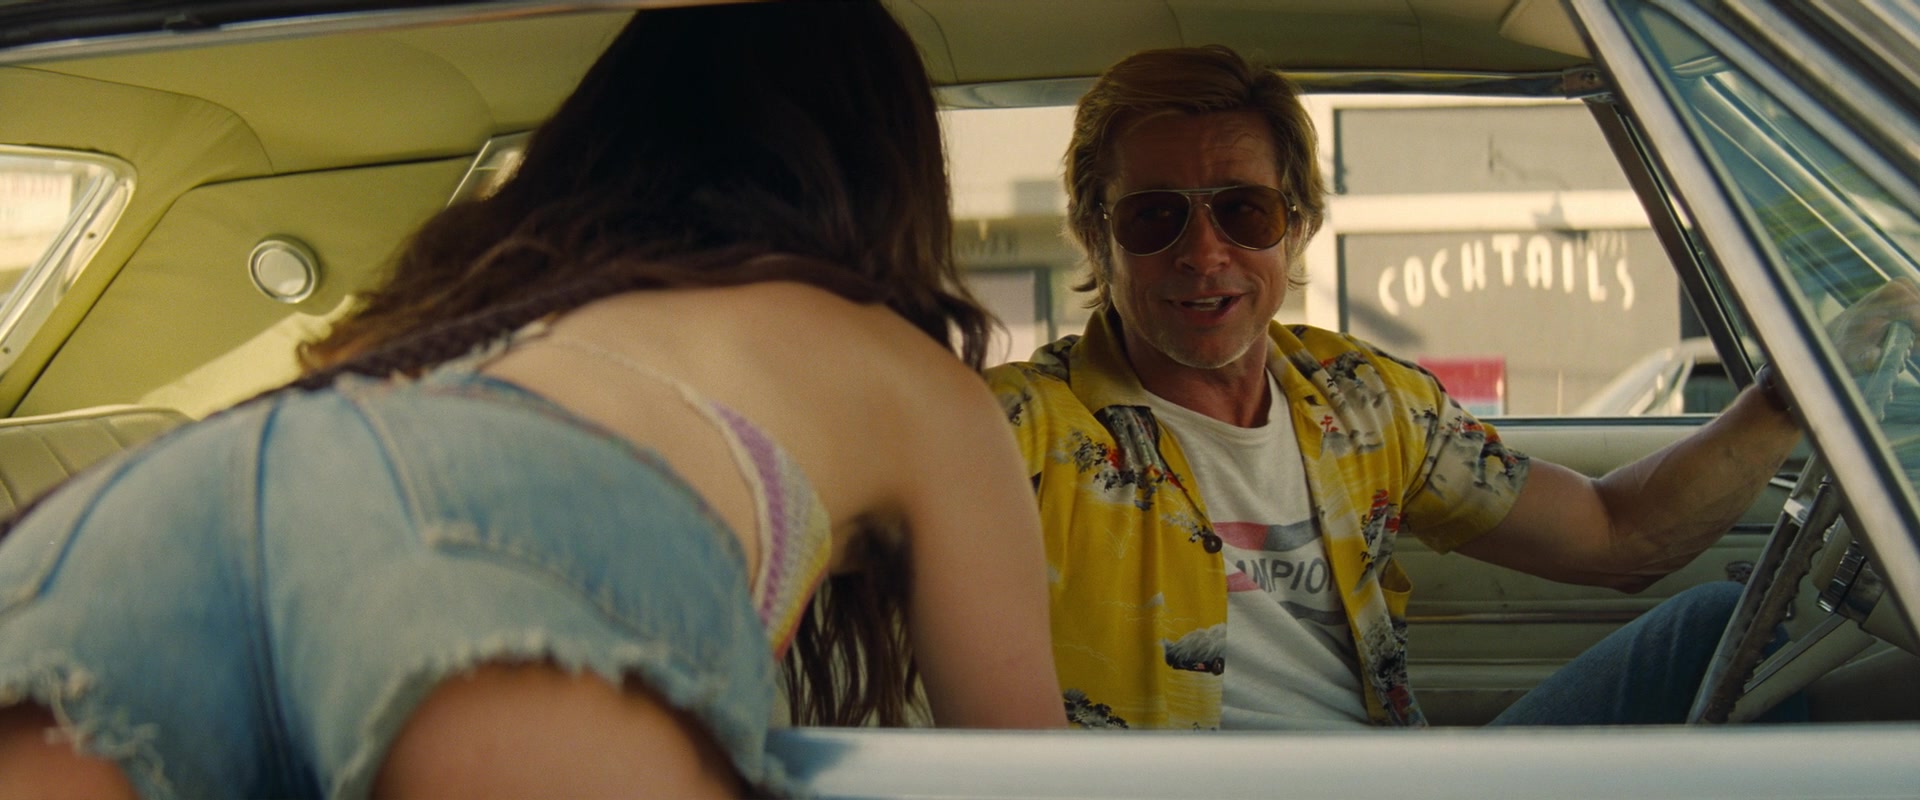 'Pussycat' (Margaret Qualley) asks Cliff Booth (Brad Pitt) for a ride in Once Upon A Time In Hollywood (2019), Sony Pictures via Blu-ray